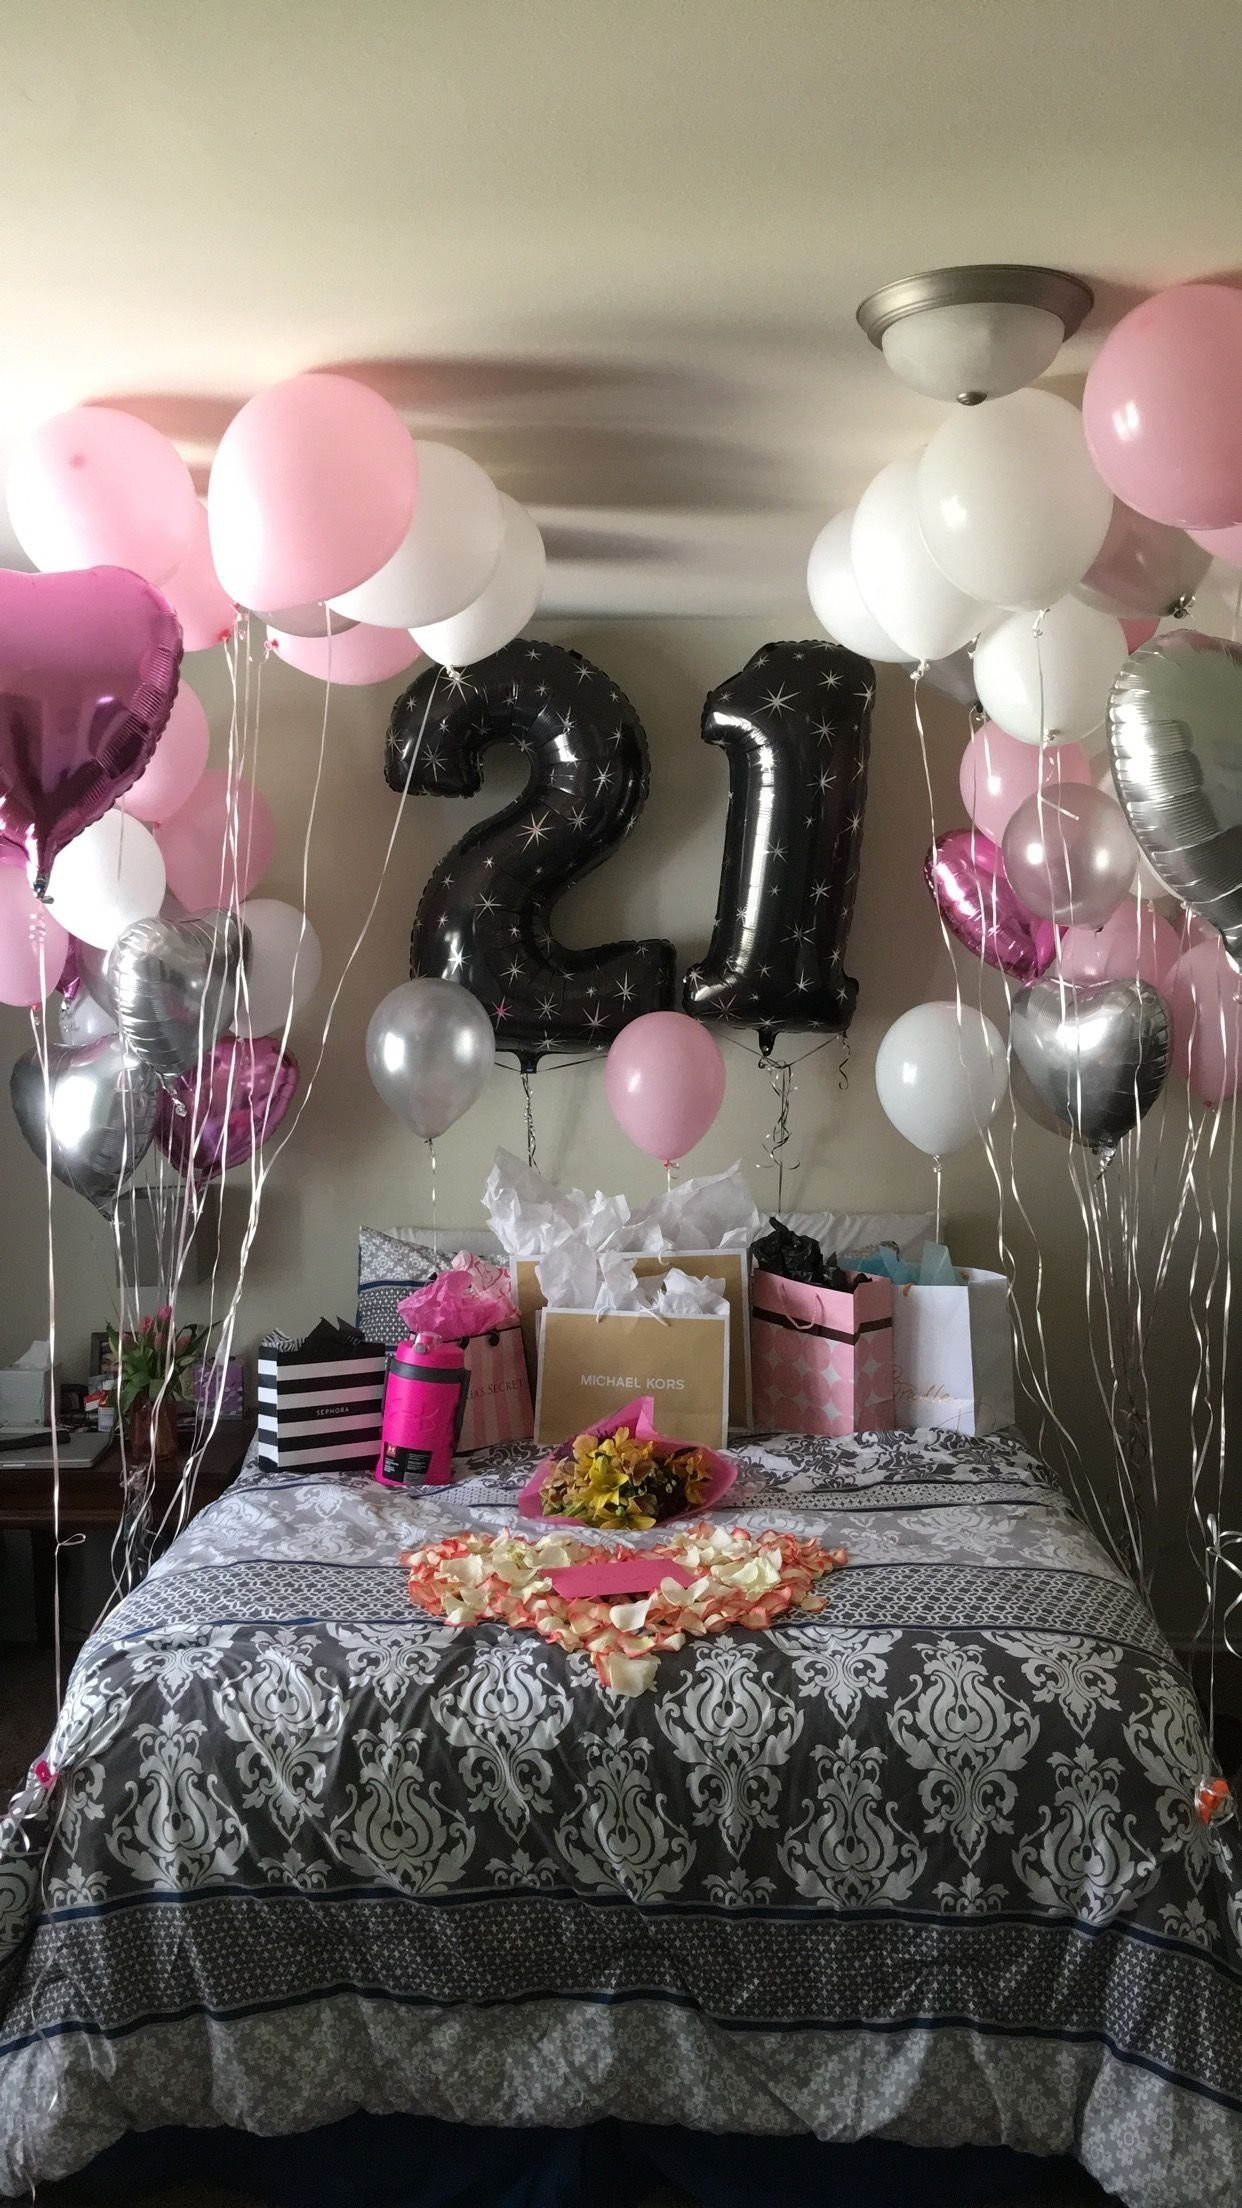 Ideas Gift For Girlfriend
 10 Fashionable Birthday Surprise Ideas For Girlfriend 2020